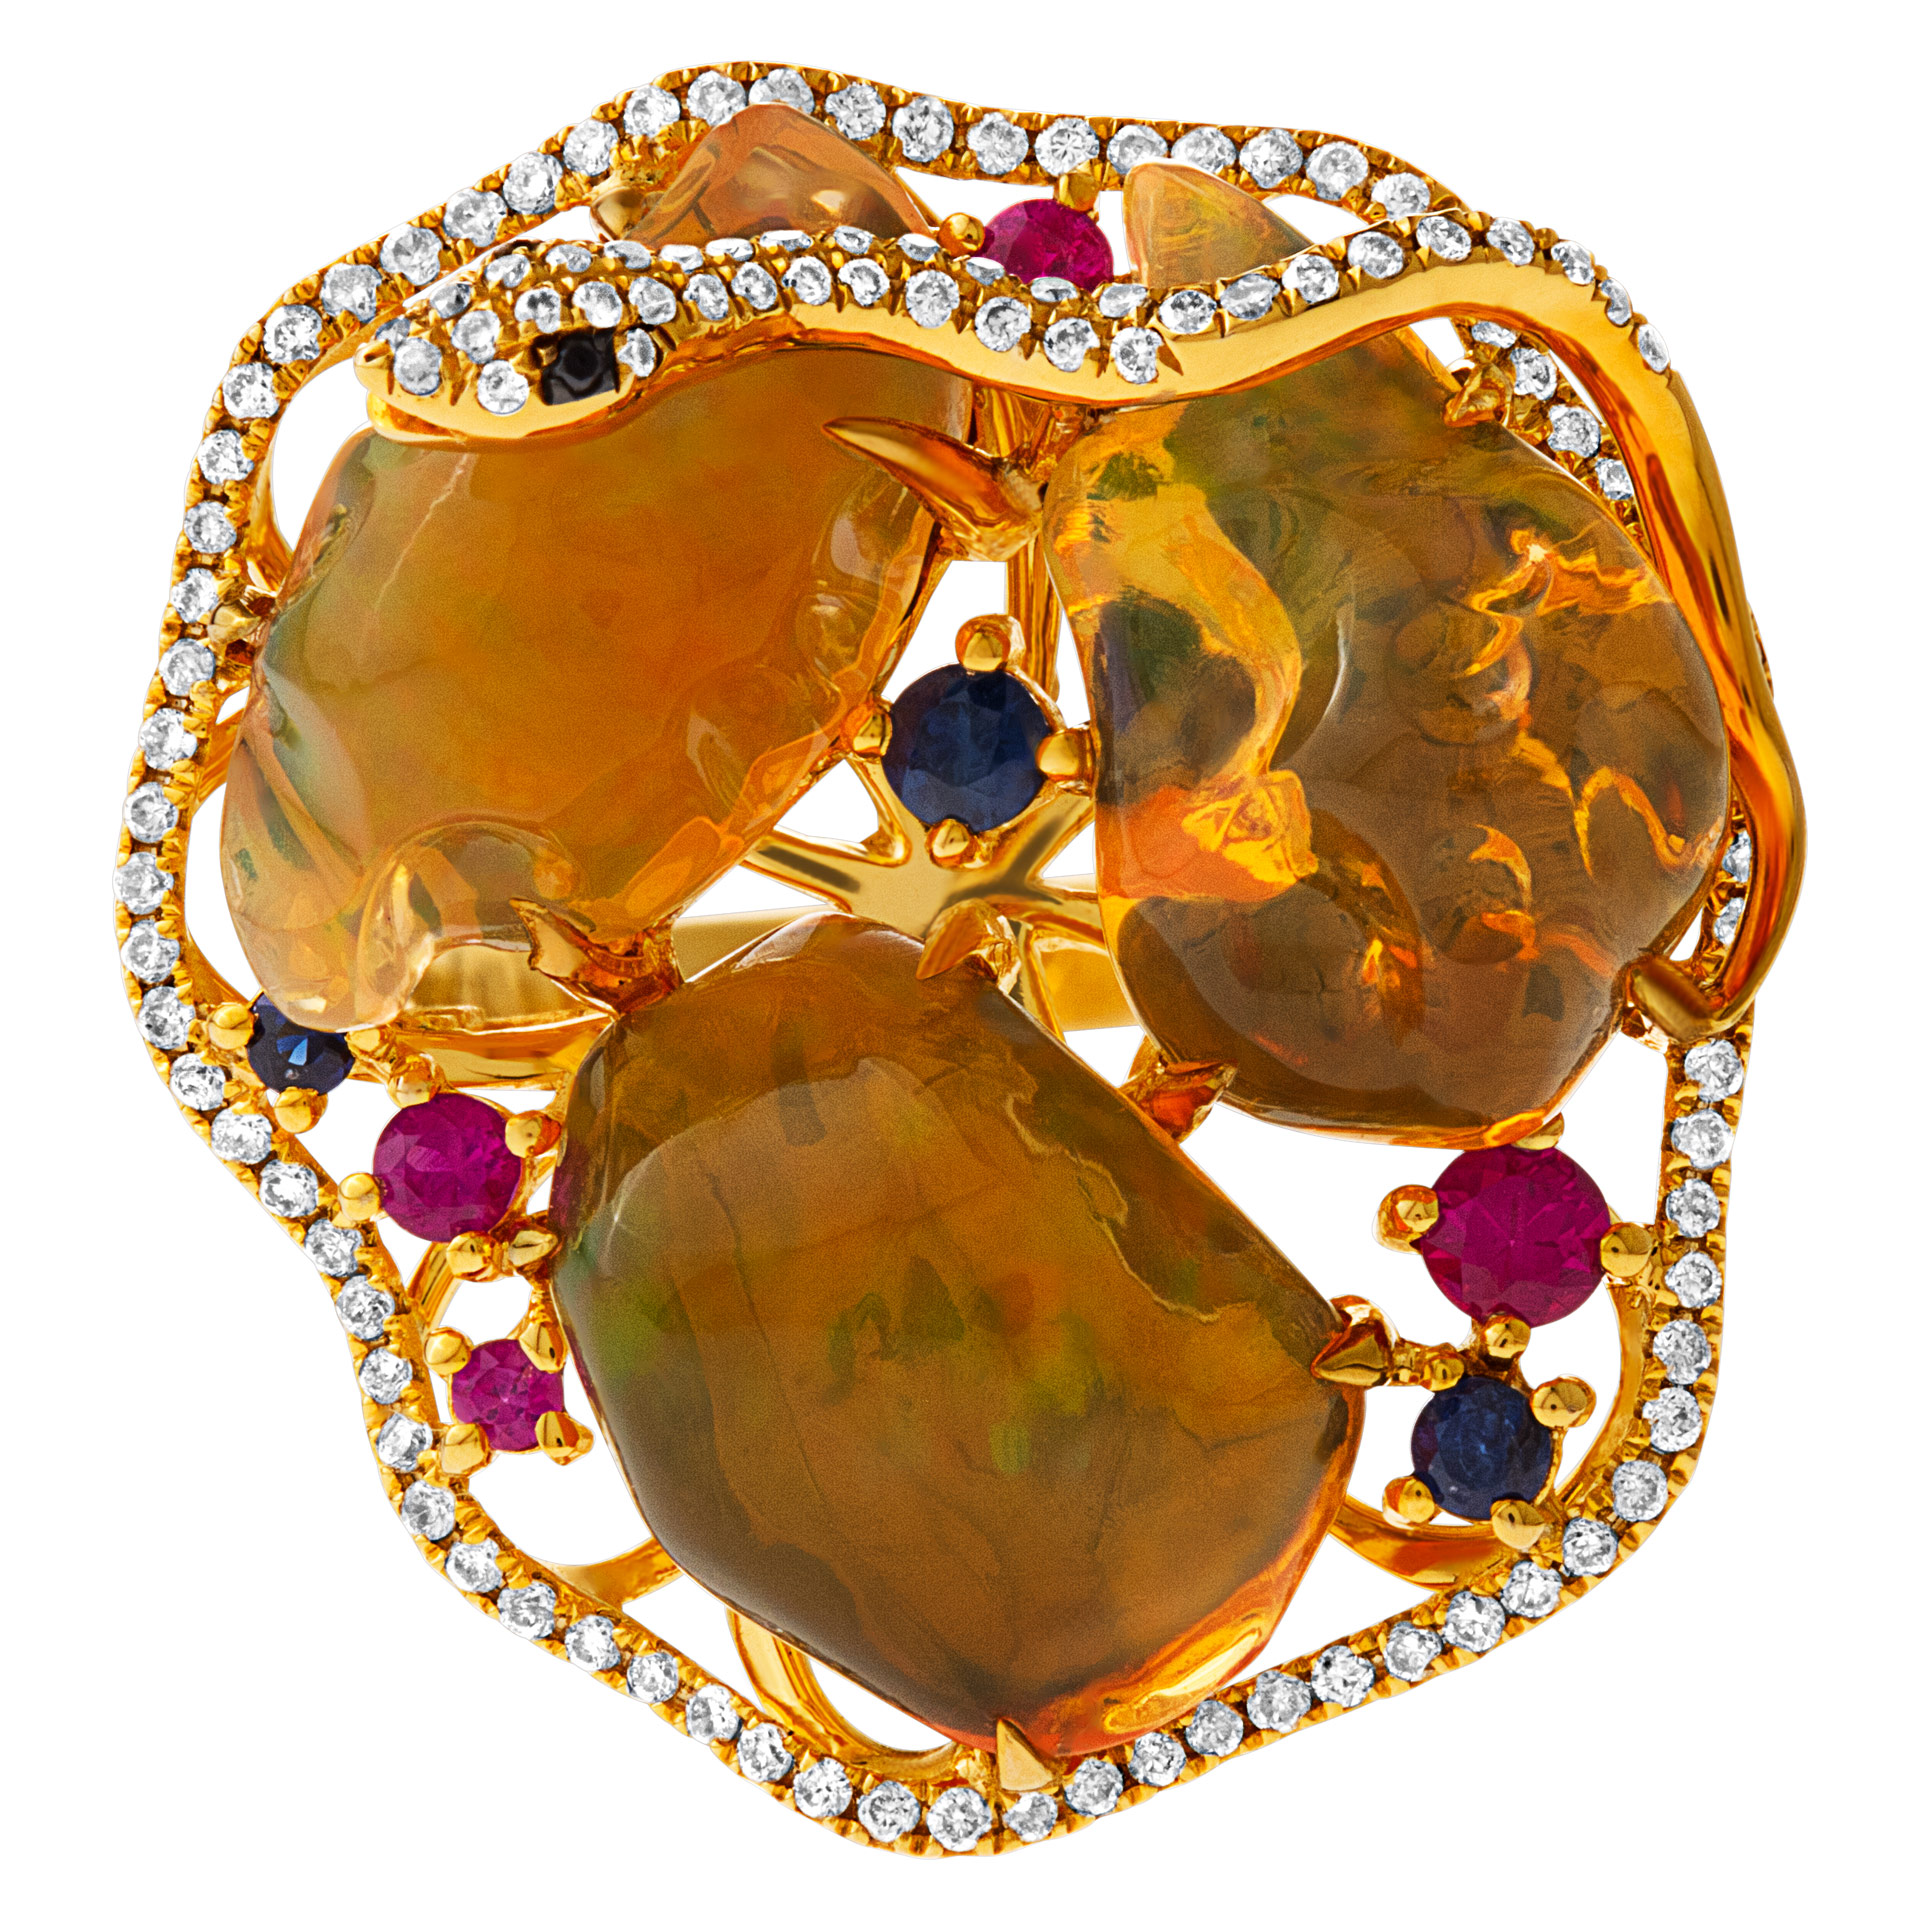 Fire opal ring in 18K yellow gold with diamond accents. 9.8cts in Opal. Size 7 image 1